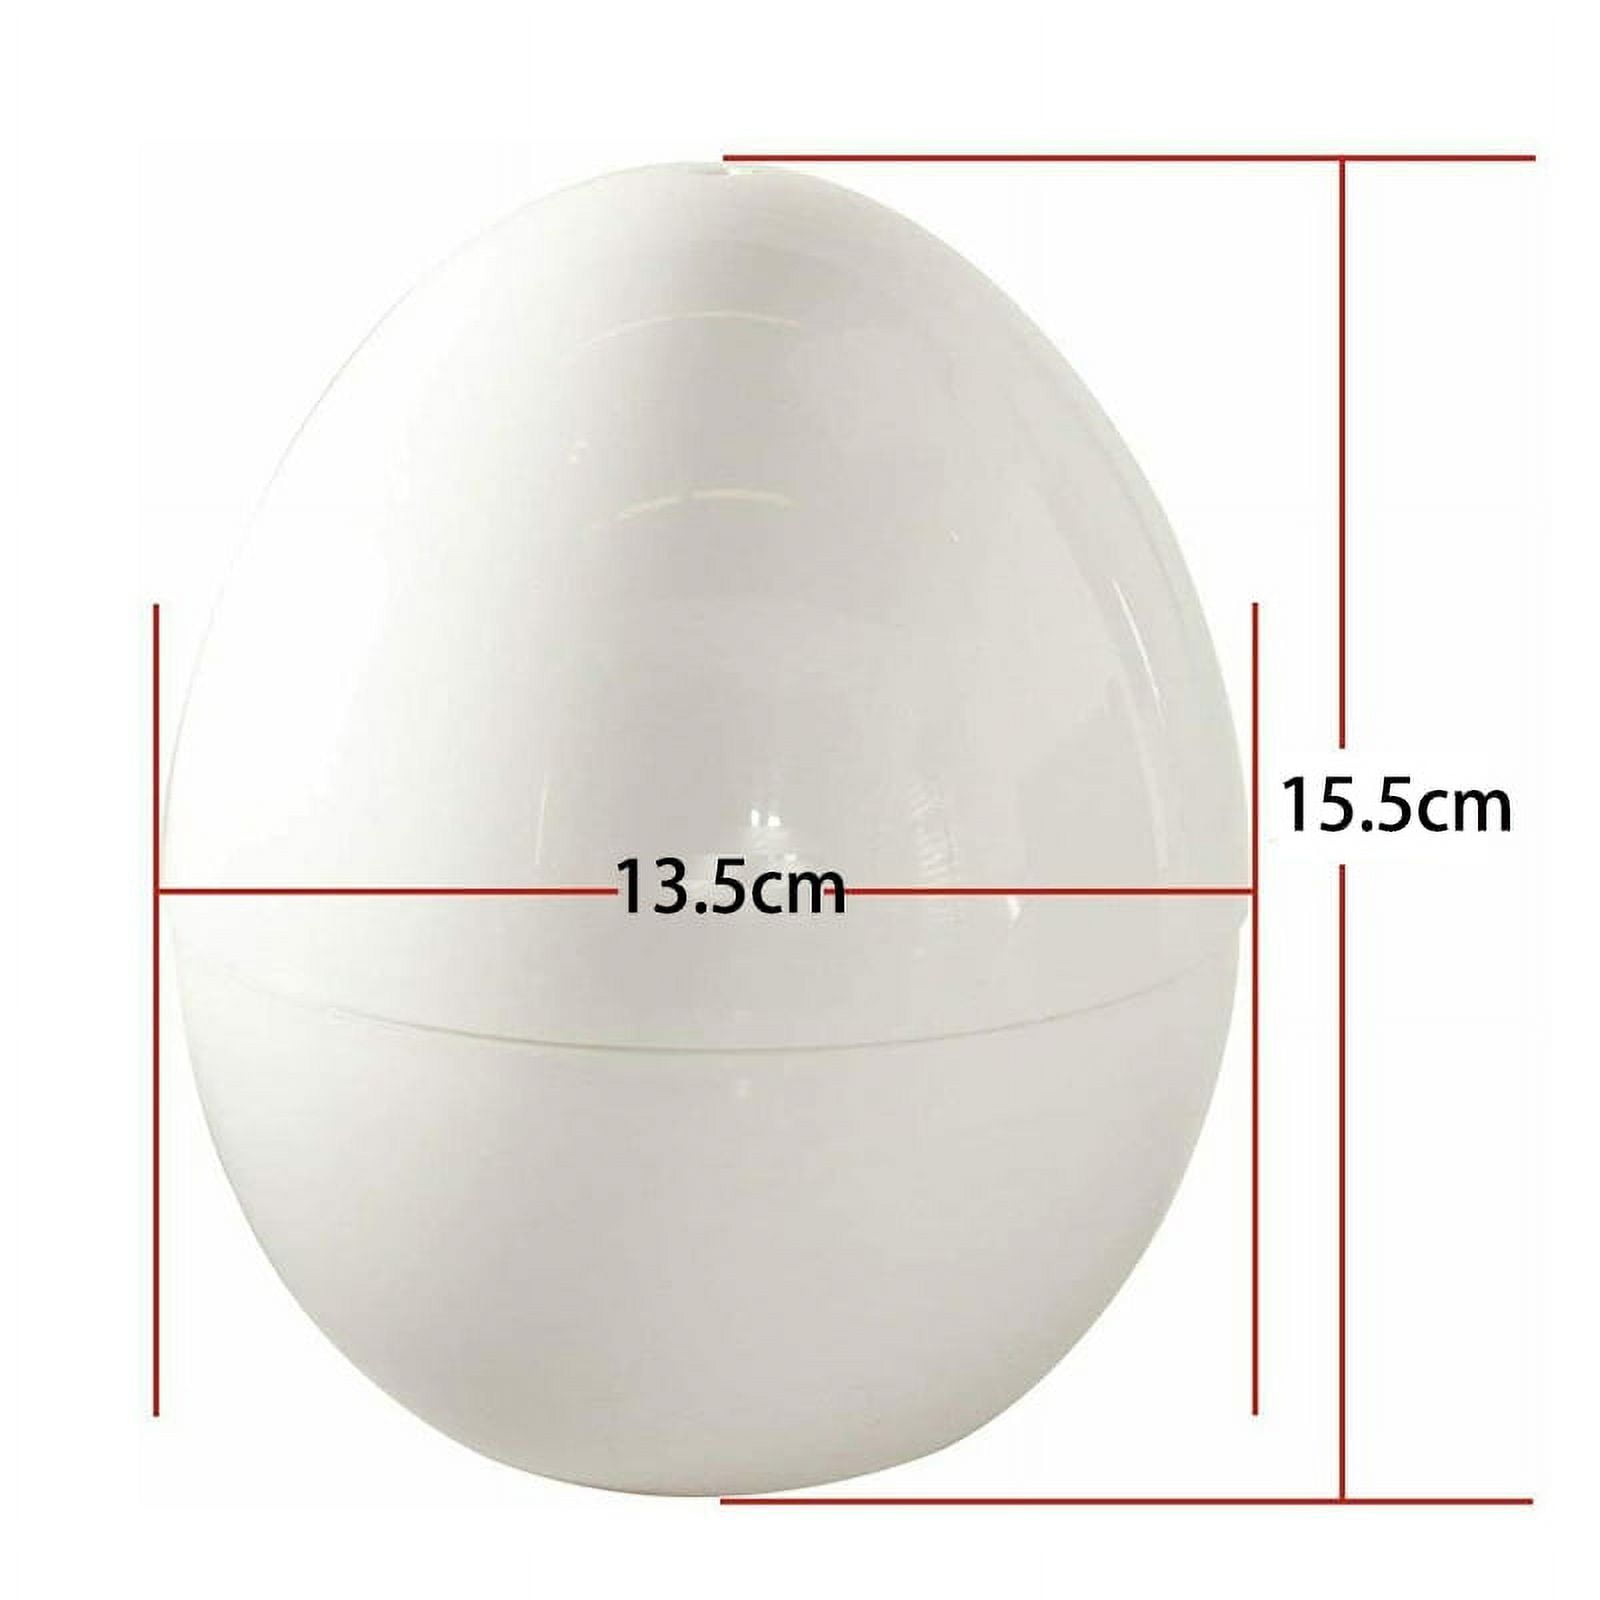  EGG POD by Emson Microwave Hardboiled Egg Maker, Cooker, Boiler  & Steamer, 4 Perfectly-Cooked Hard boiled Eggs in Under 9 minutes,  Dishwasher Safe, Airtight and Warp Proof As Seen On TV